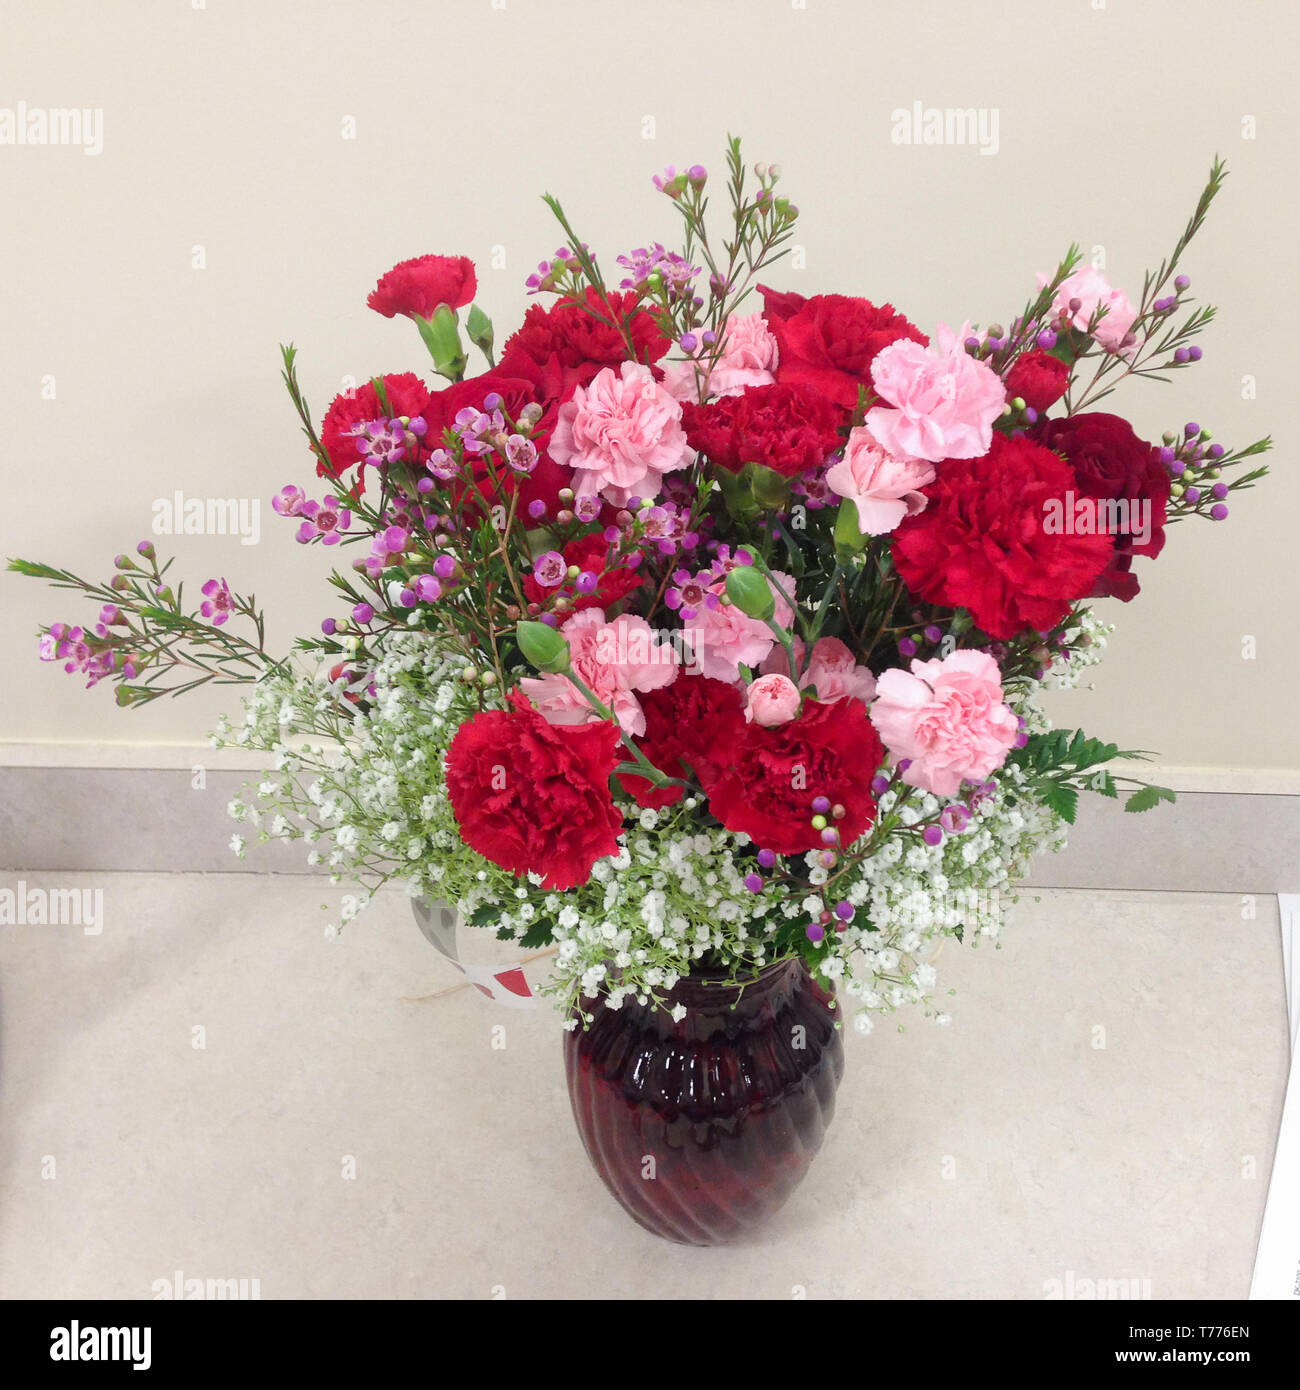 Flower bouquet with red roses in a vase on a desk Stock Photo